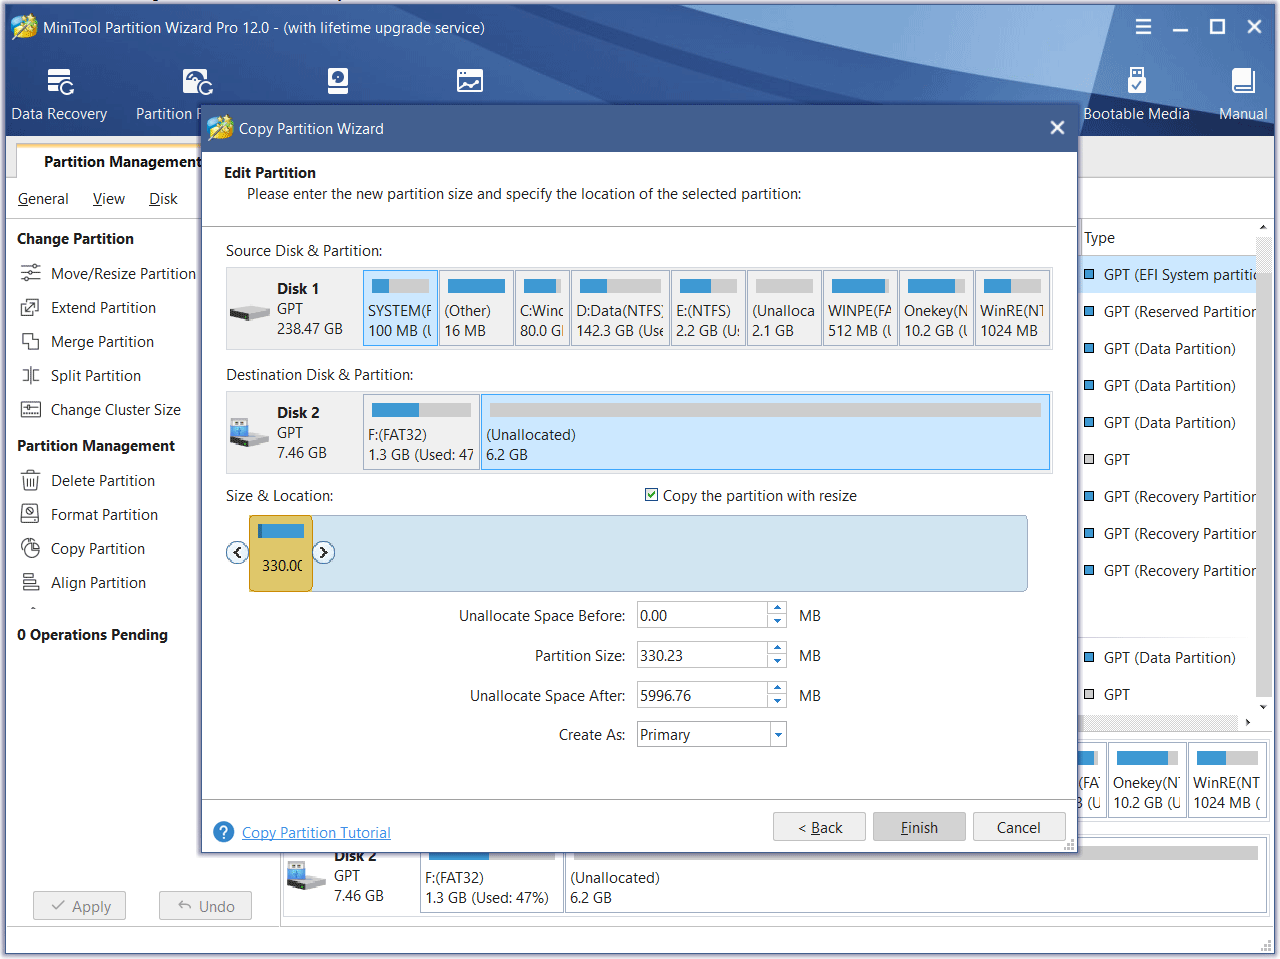 edit the new partition size